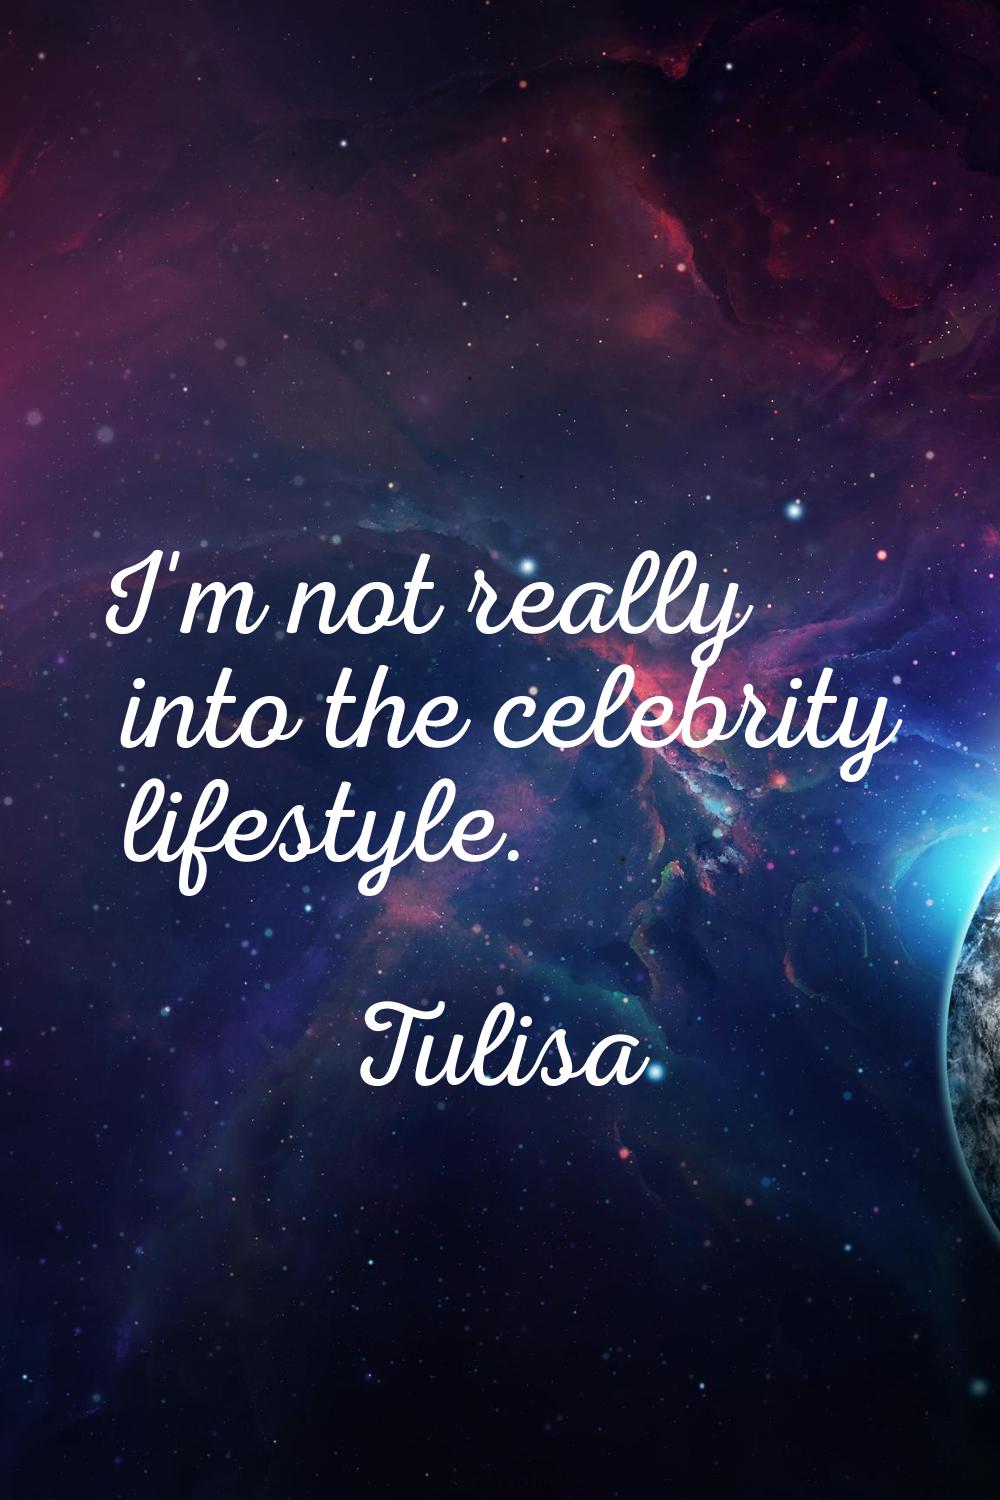 I'm not really into the celebrity lifestyle.